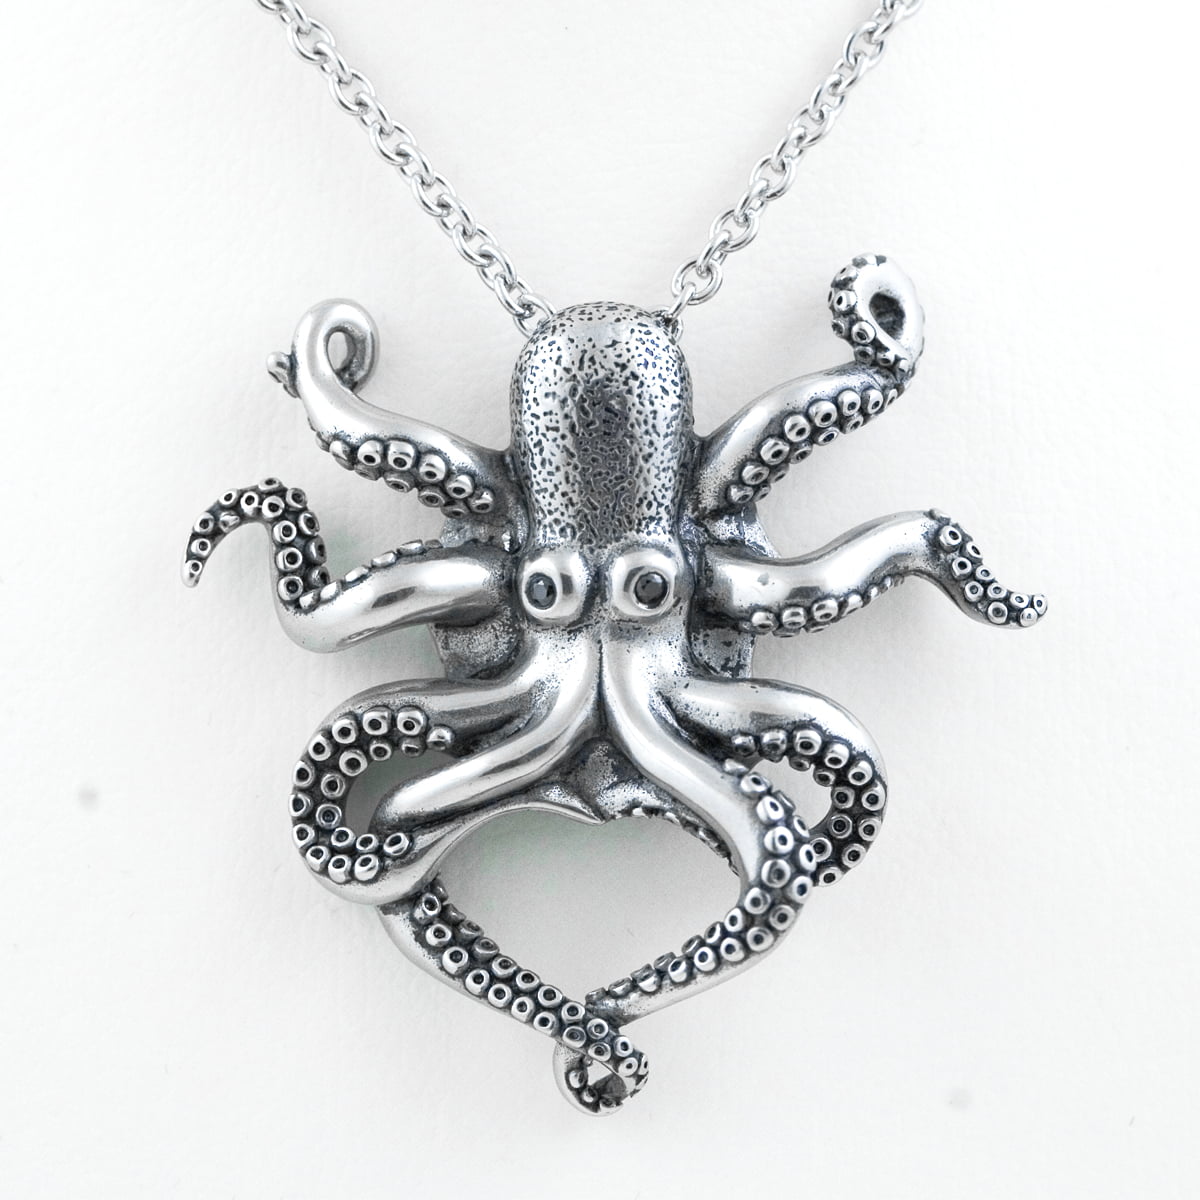 Charm Sterling Silver Flawless Quality Octopus Pendant 18" Italian Box Chain 